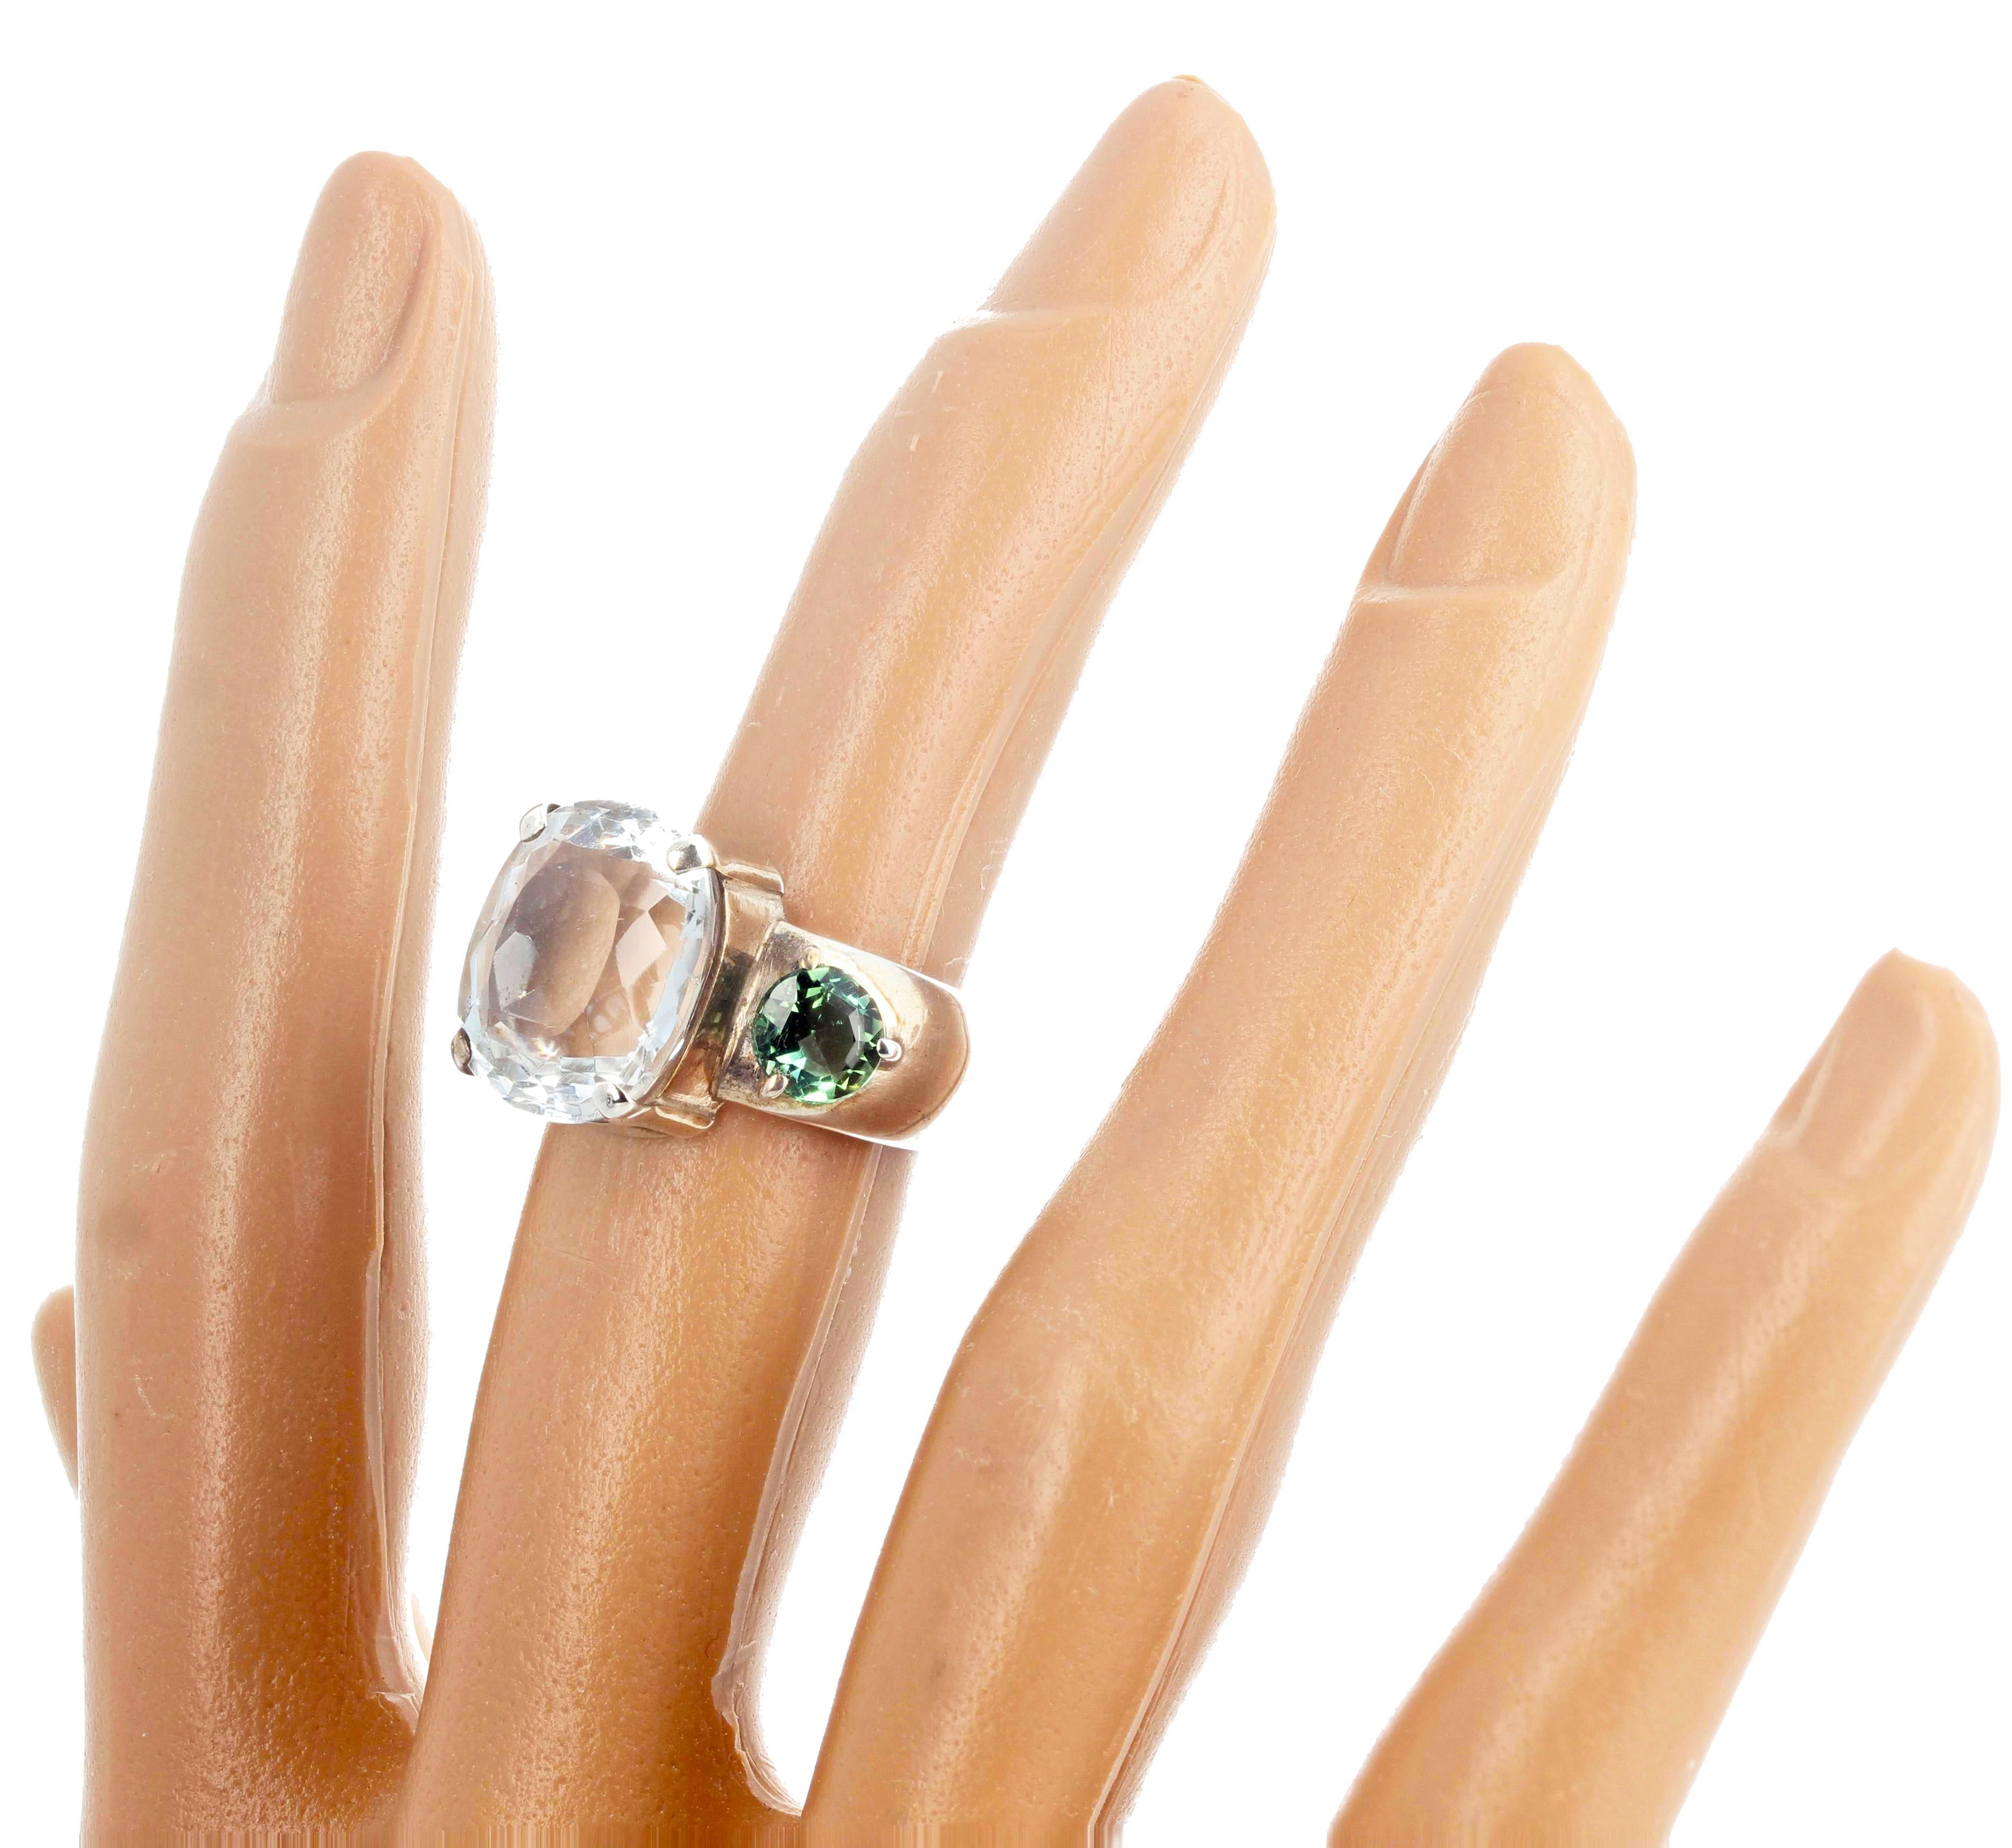 Huge cushion cut sparkling natural WHITE Topaz (14 mm x 12.8 mm) enhanced with beautiful sparkling green Tourmalines (6 mm - approximately 0.75 carats each) set in this lovely sterling silver ring size 8 sizable FOR FREE.  Please note the ring is